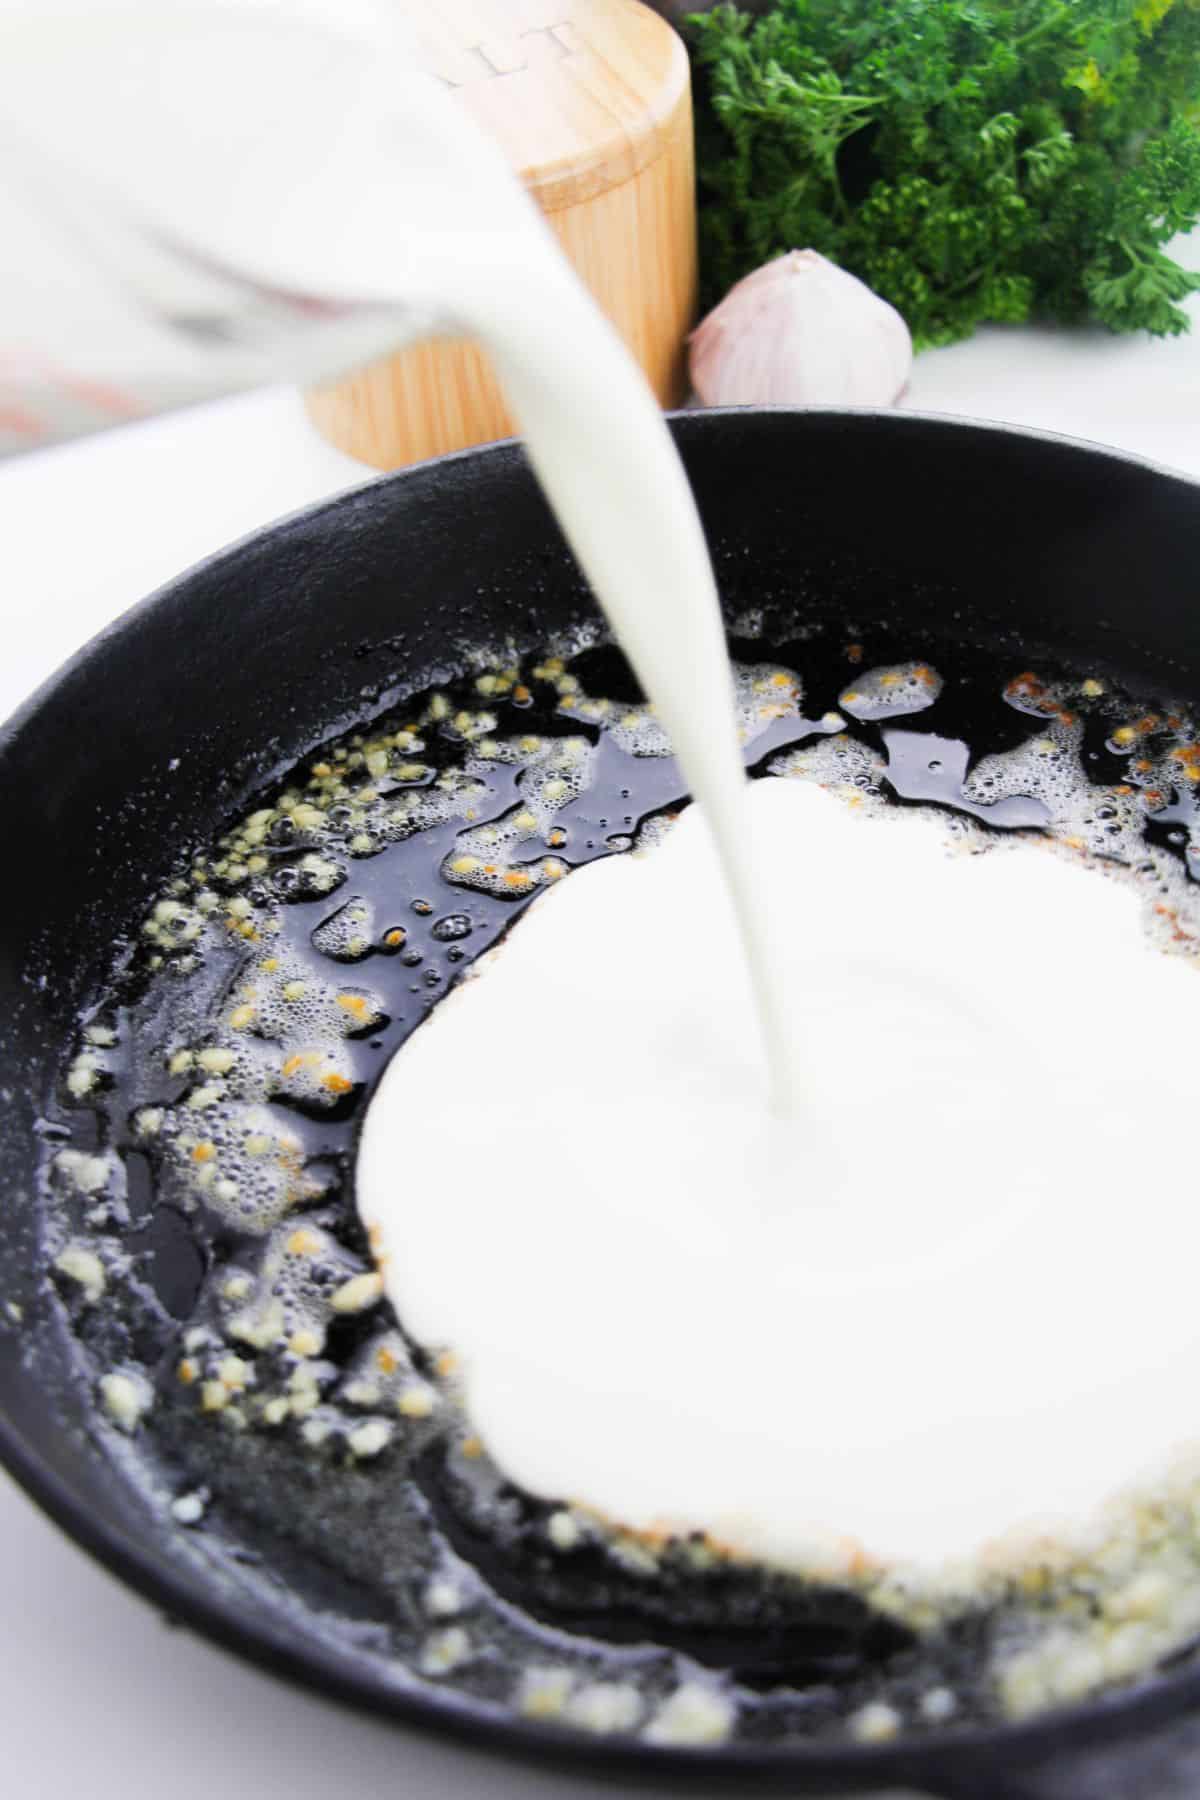 The heavy cream is added to the skillet.